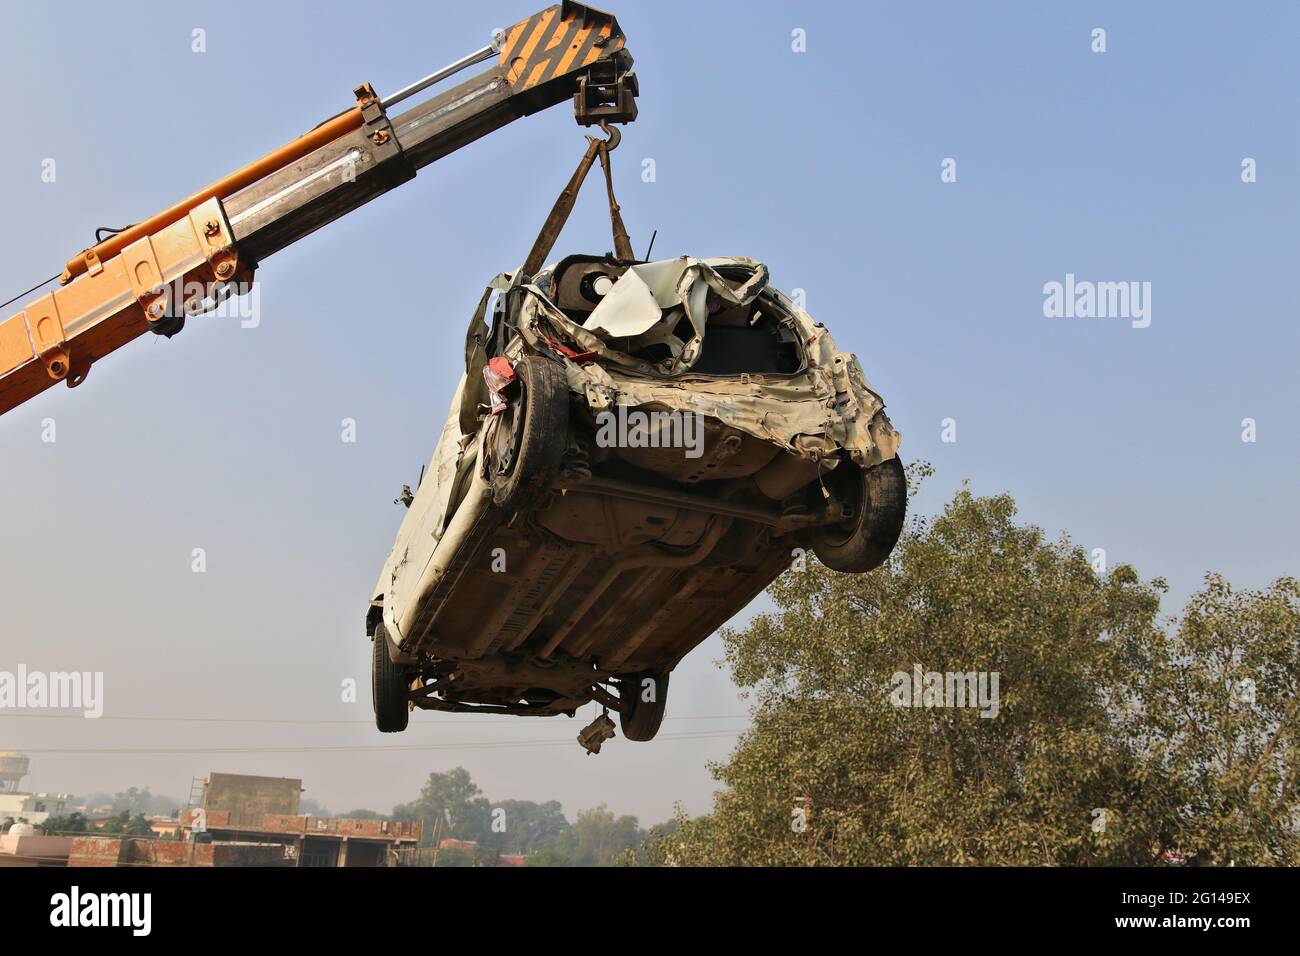 A crane lifts a broken car for loading onto a tow truck at the scene of the accident. Haryana, India Stock Photo